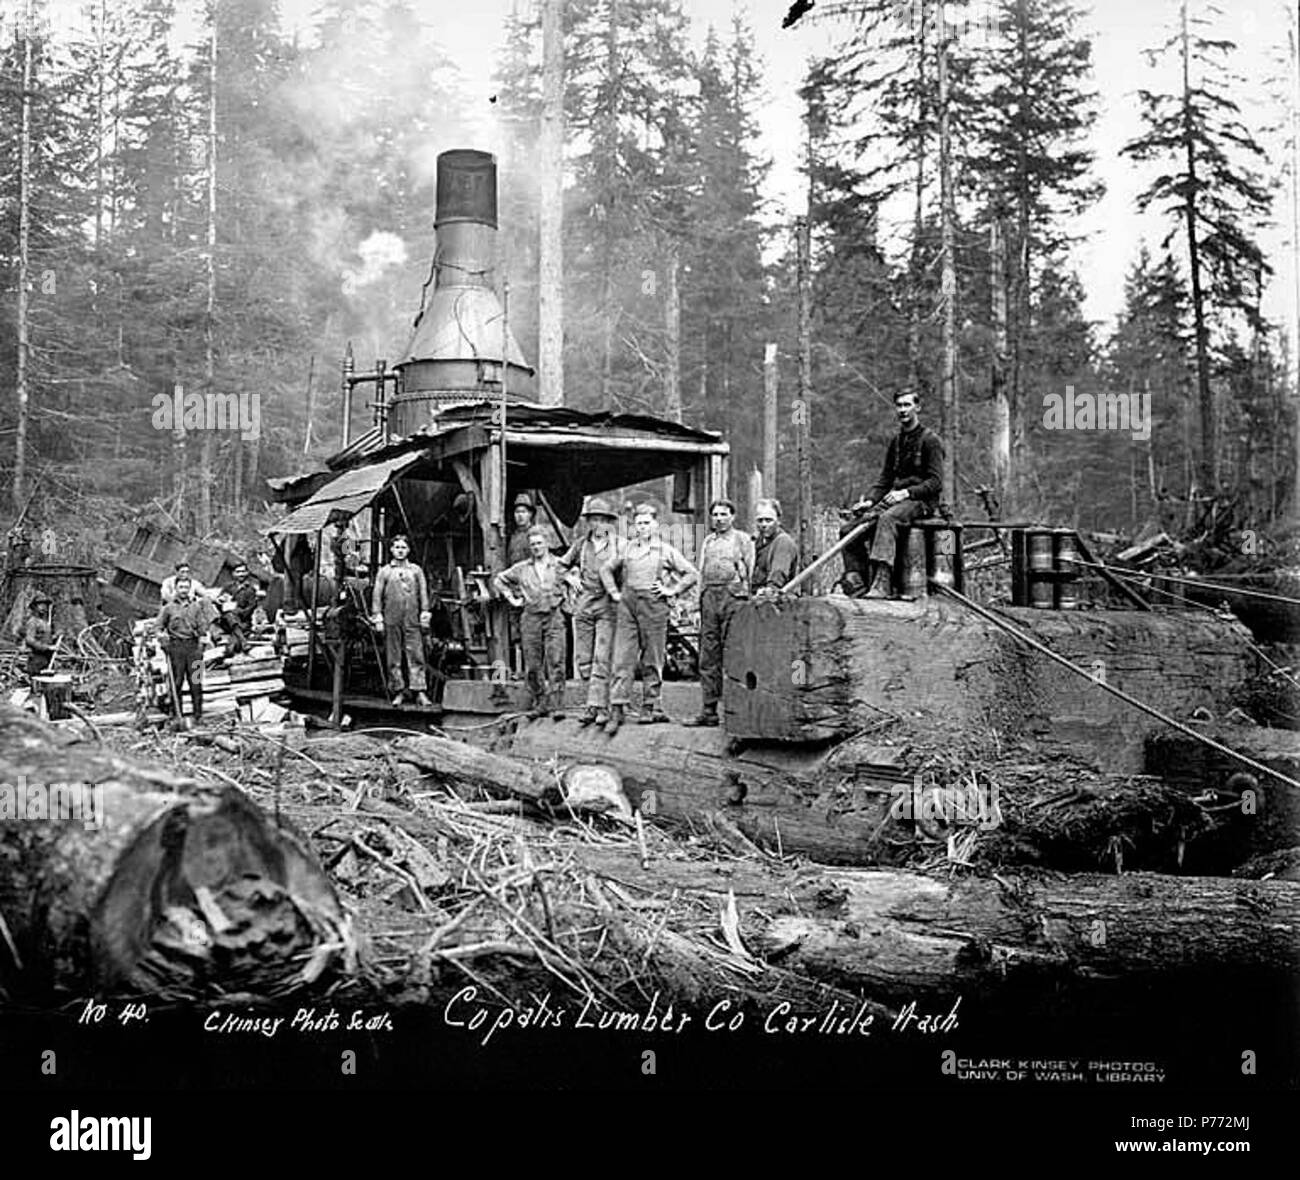 . English: Crew with donkey engine, Copalis Lumber Company, near Carlisle, ca. 1917 . English: Caption on image: Copalis Lumber Co., Carlisle, Wash. C. Kinsey Photo, Seattle. No. 40 PH Coll 516.814 The Copalis Lumber Company was in business in Carlisle from 1914 to 1920. It's logging railroad was absorbed into the Carlisle Lumber Company. Carlisle is a small settlement on the Copalis River four miles east of the Pacific Ocean in southwest Grays Harbor County. When established in 1912 by the Carlisle Lumber Company, it was a busy logging and sawmill center. It continued to be active until the c Stock Photo